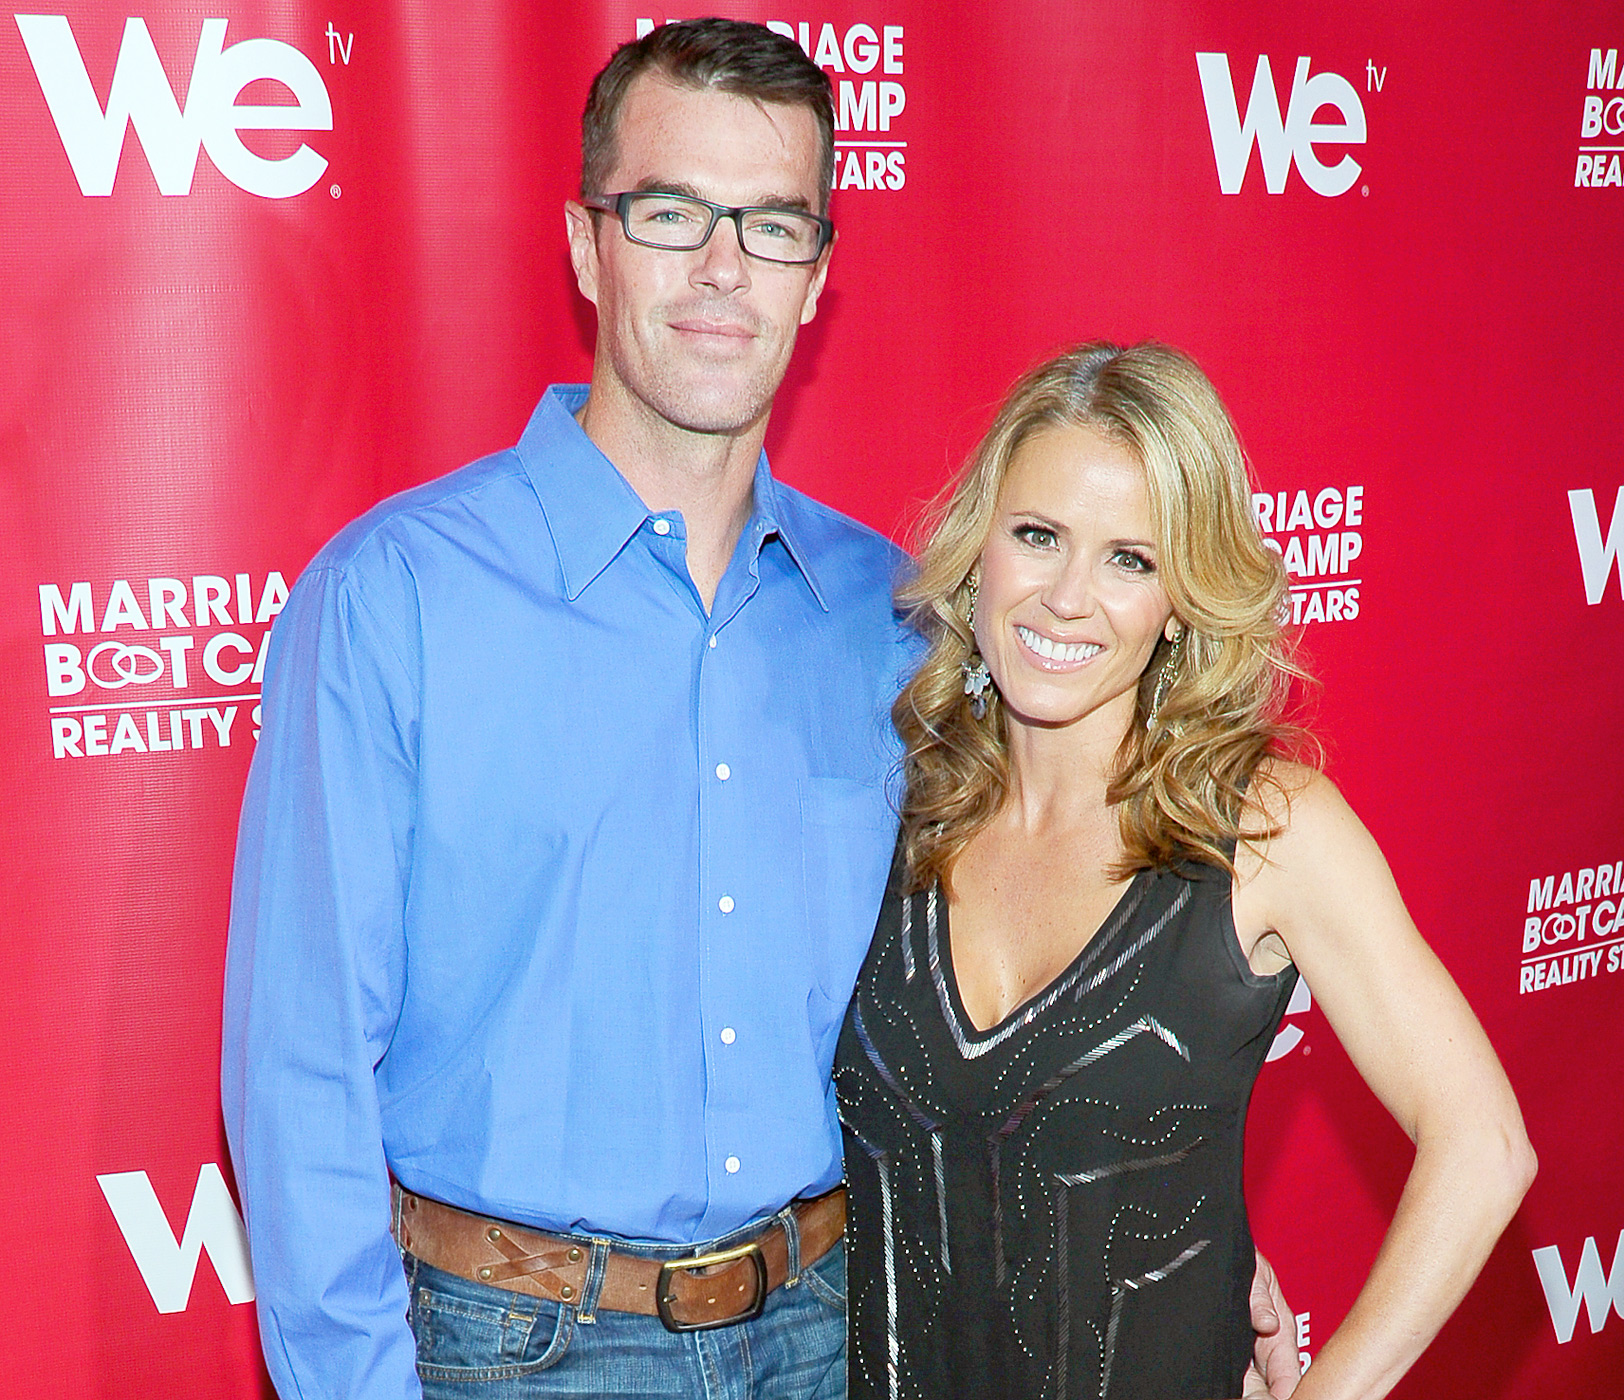 Trista with her husband, attending an event show.